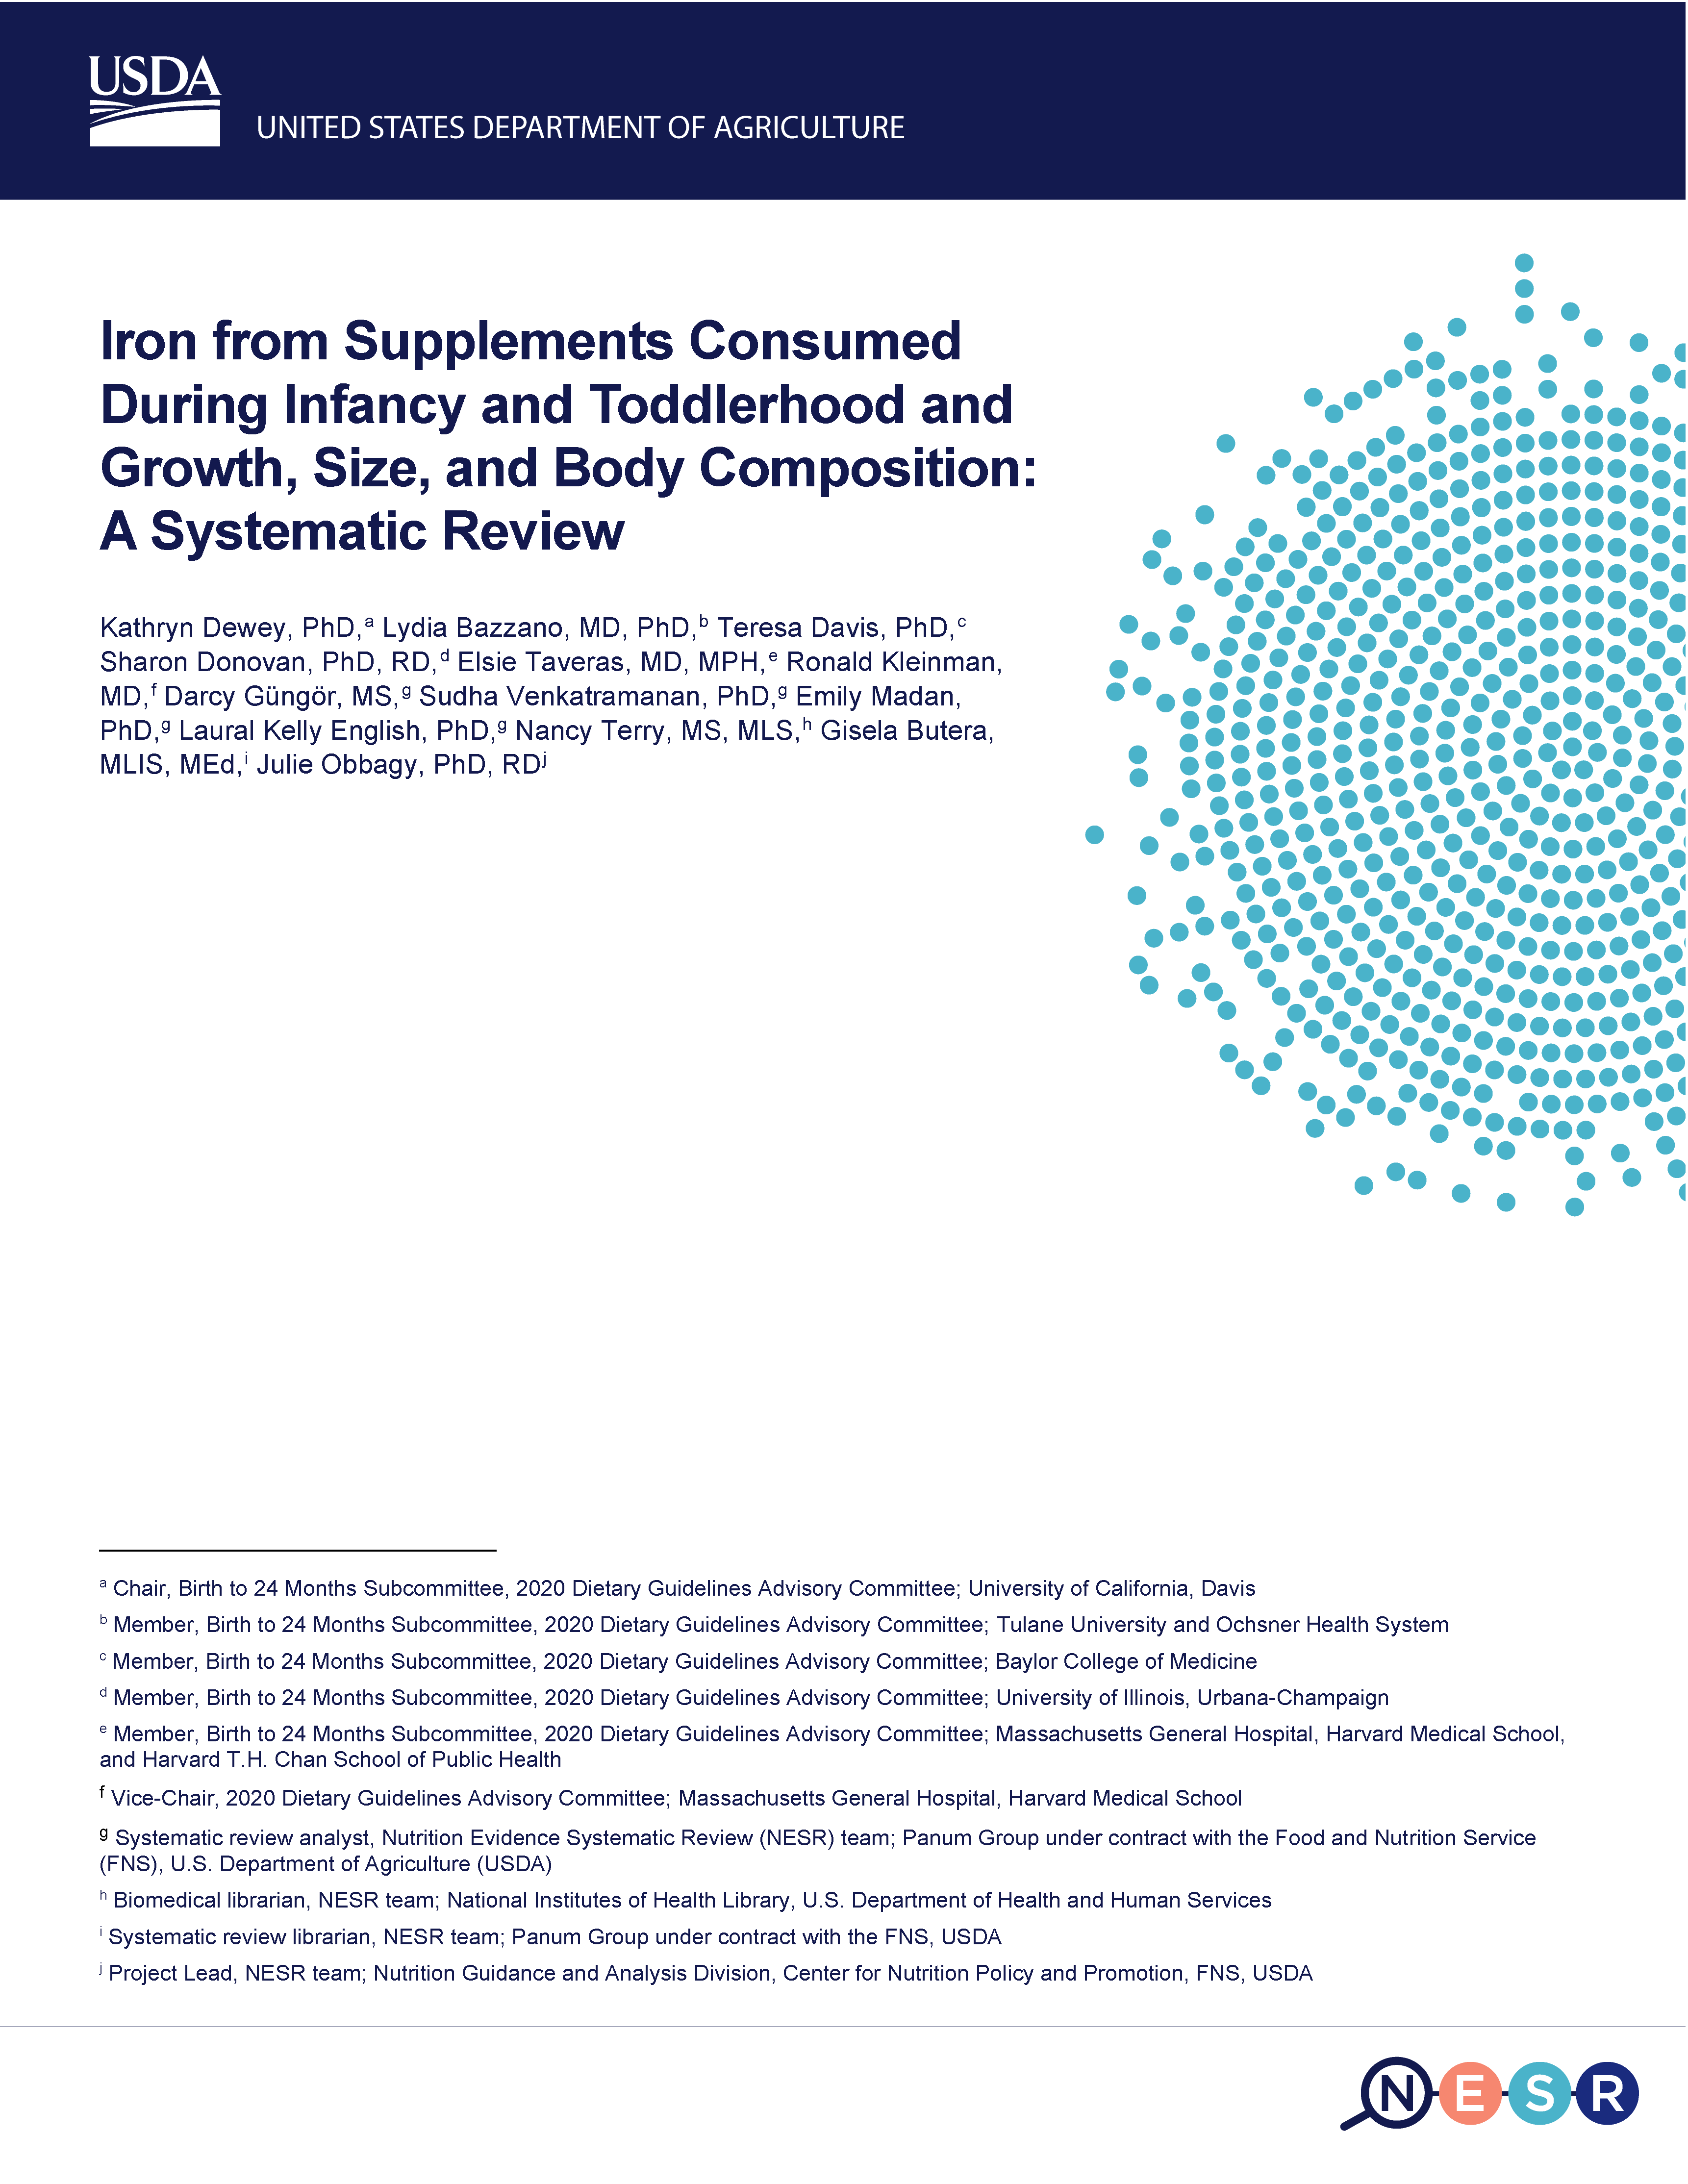 Cover of iron supplements consumed during infancy and toddlerhood and growth size body composition report